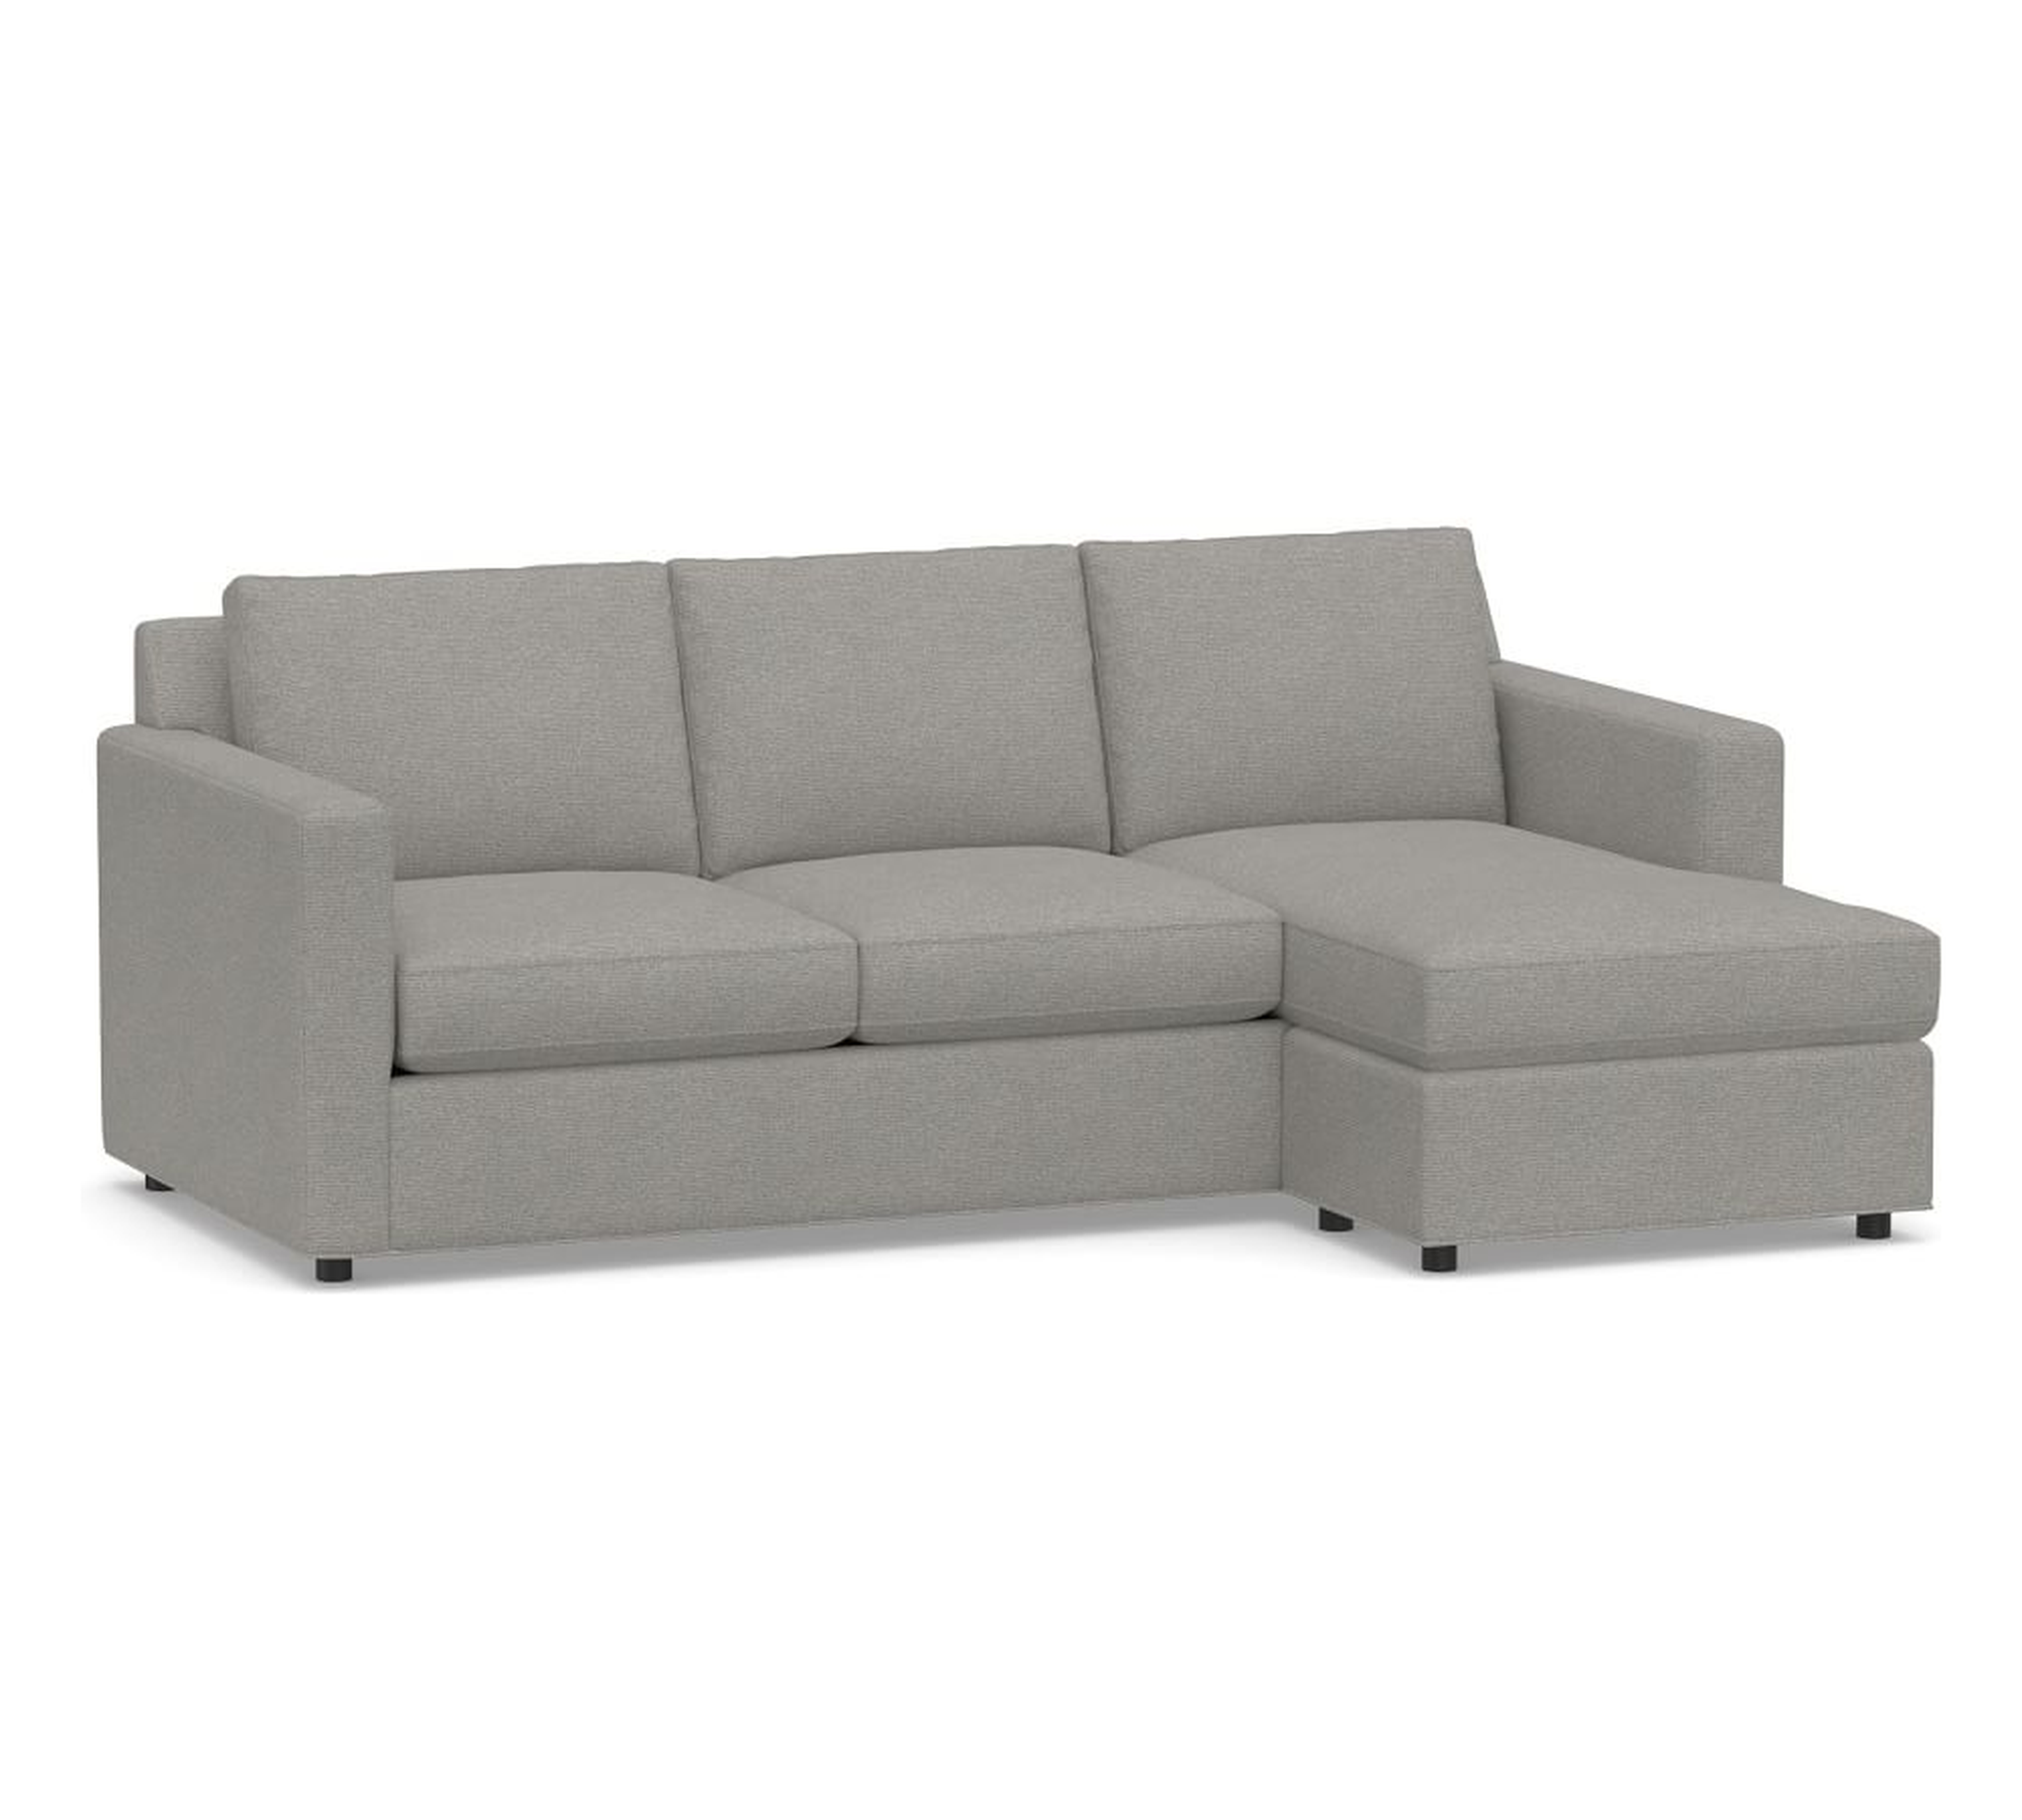 Sanford Square Arm Upholstered Sofa with Reversible Storage Chaise Sectional, Polyester Wrapped Cushions, Performance Heathered Basketweave Platinum - Pottery Barn